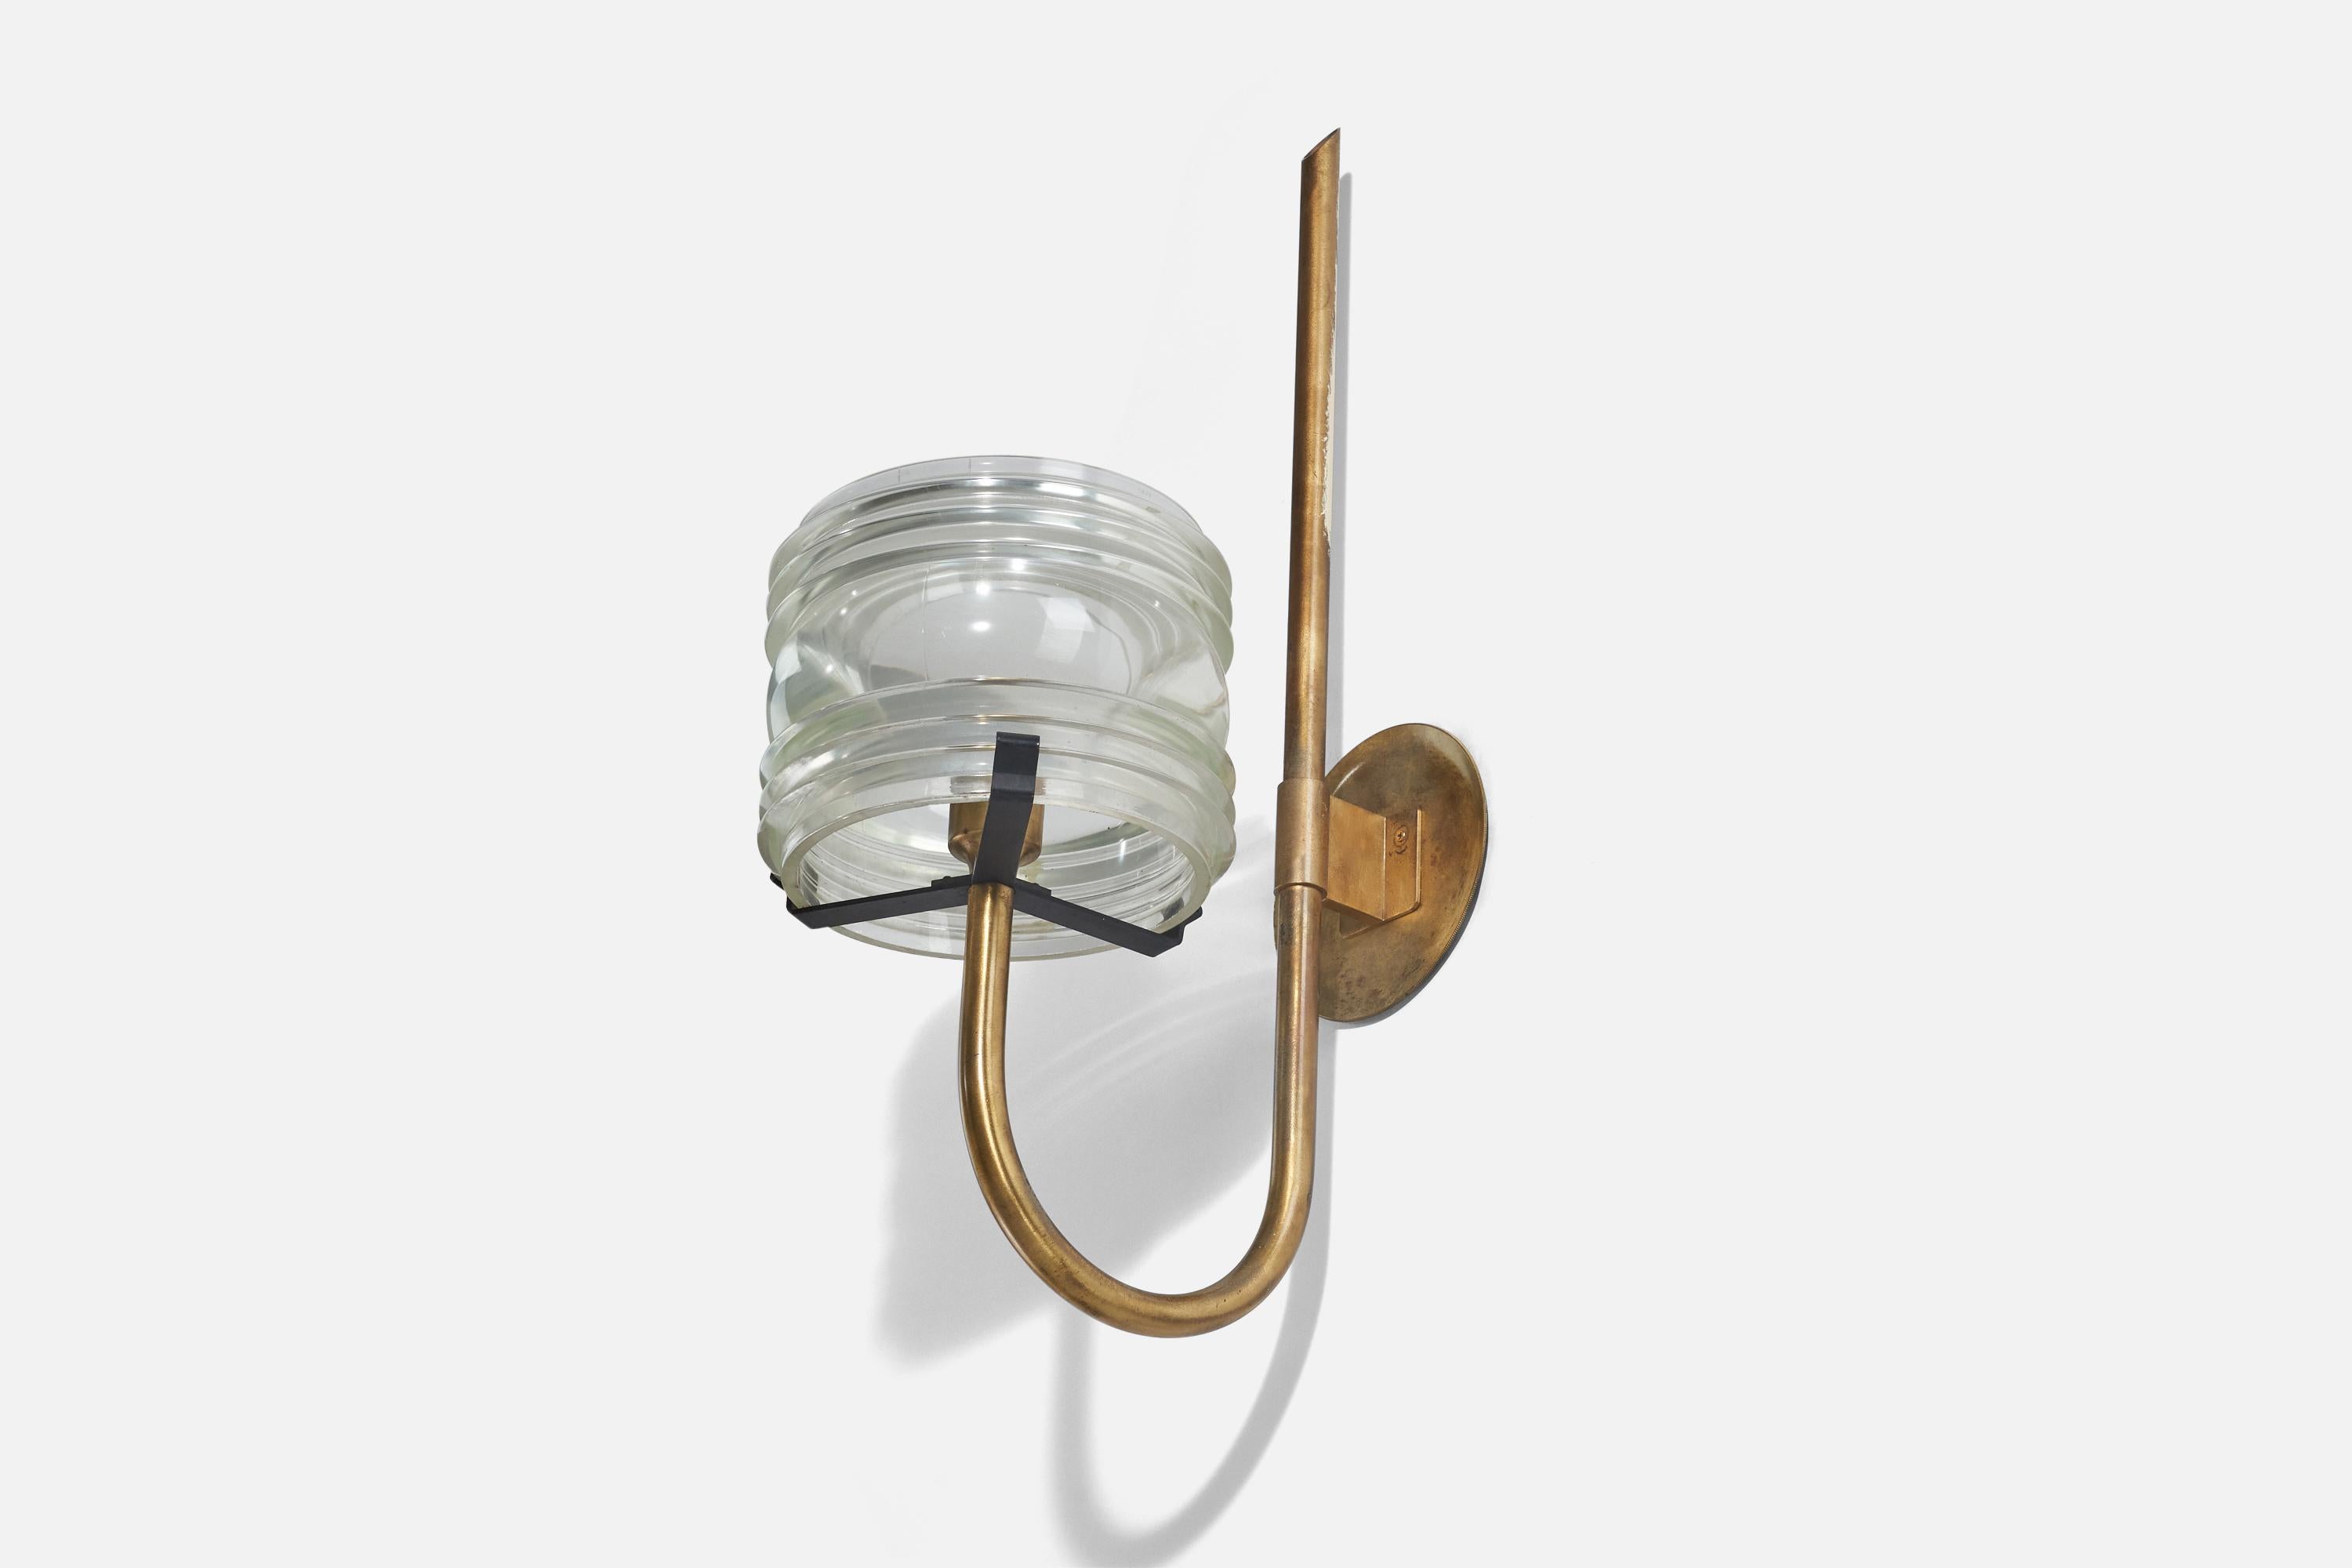 A brass, glass and black-lacquered metal sconce / wall light designed and produced by an Italian designer, Italy, 1960s.

Dimensions of Back Plate (inches) : 6.43 x 6.43 x 0.25 (Height x Width x Depth).

Socket takes standard E-26 medium base